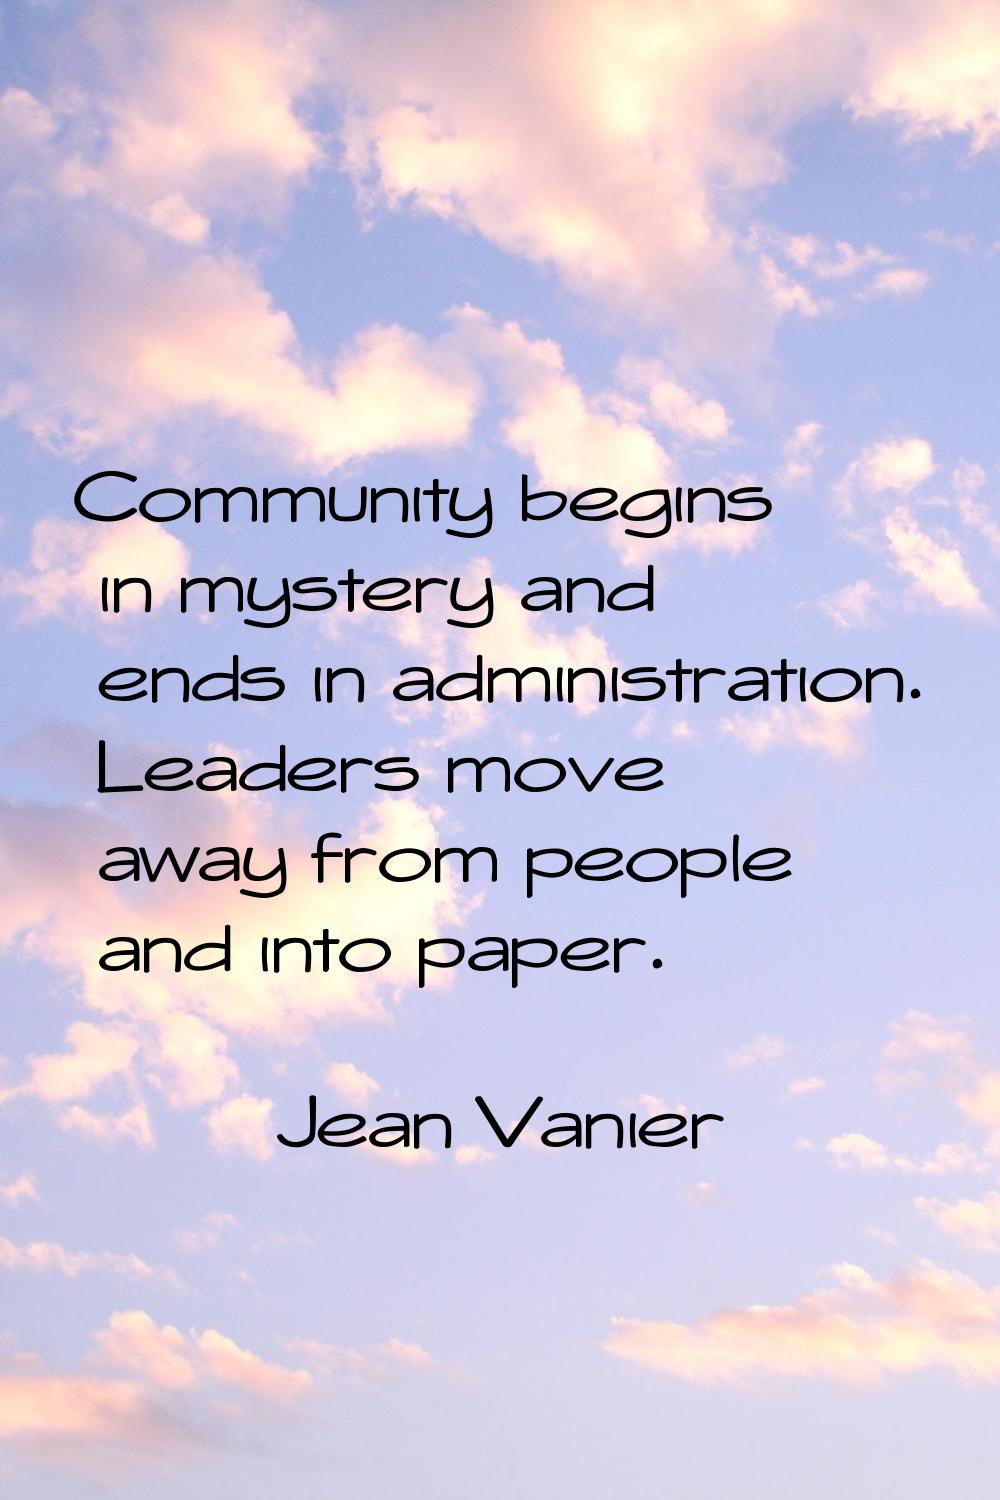 Community begins in mystery and ends in administration. Leaders move away from people and into pape